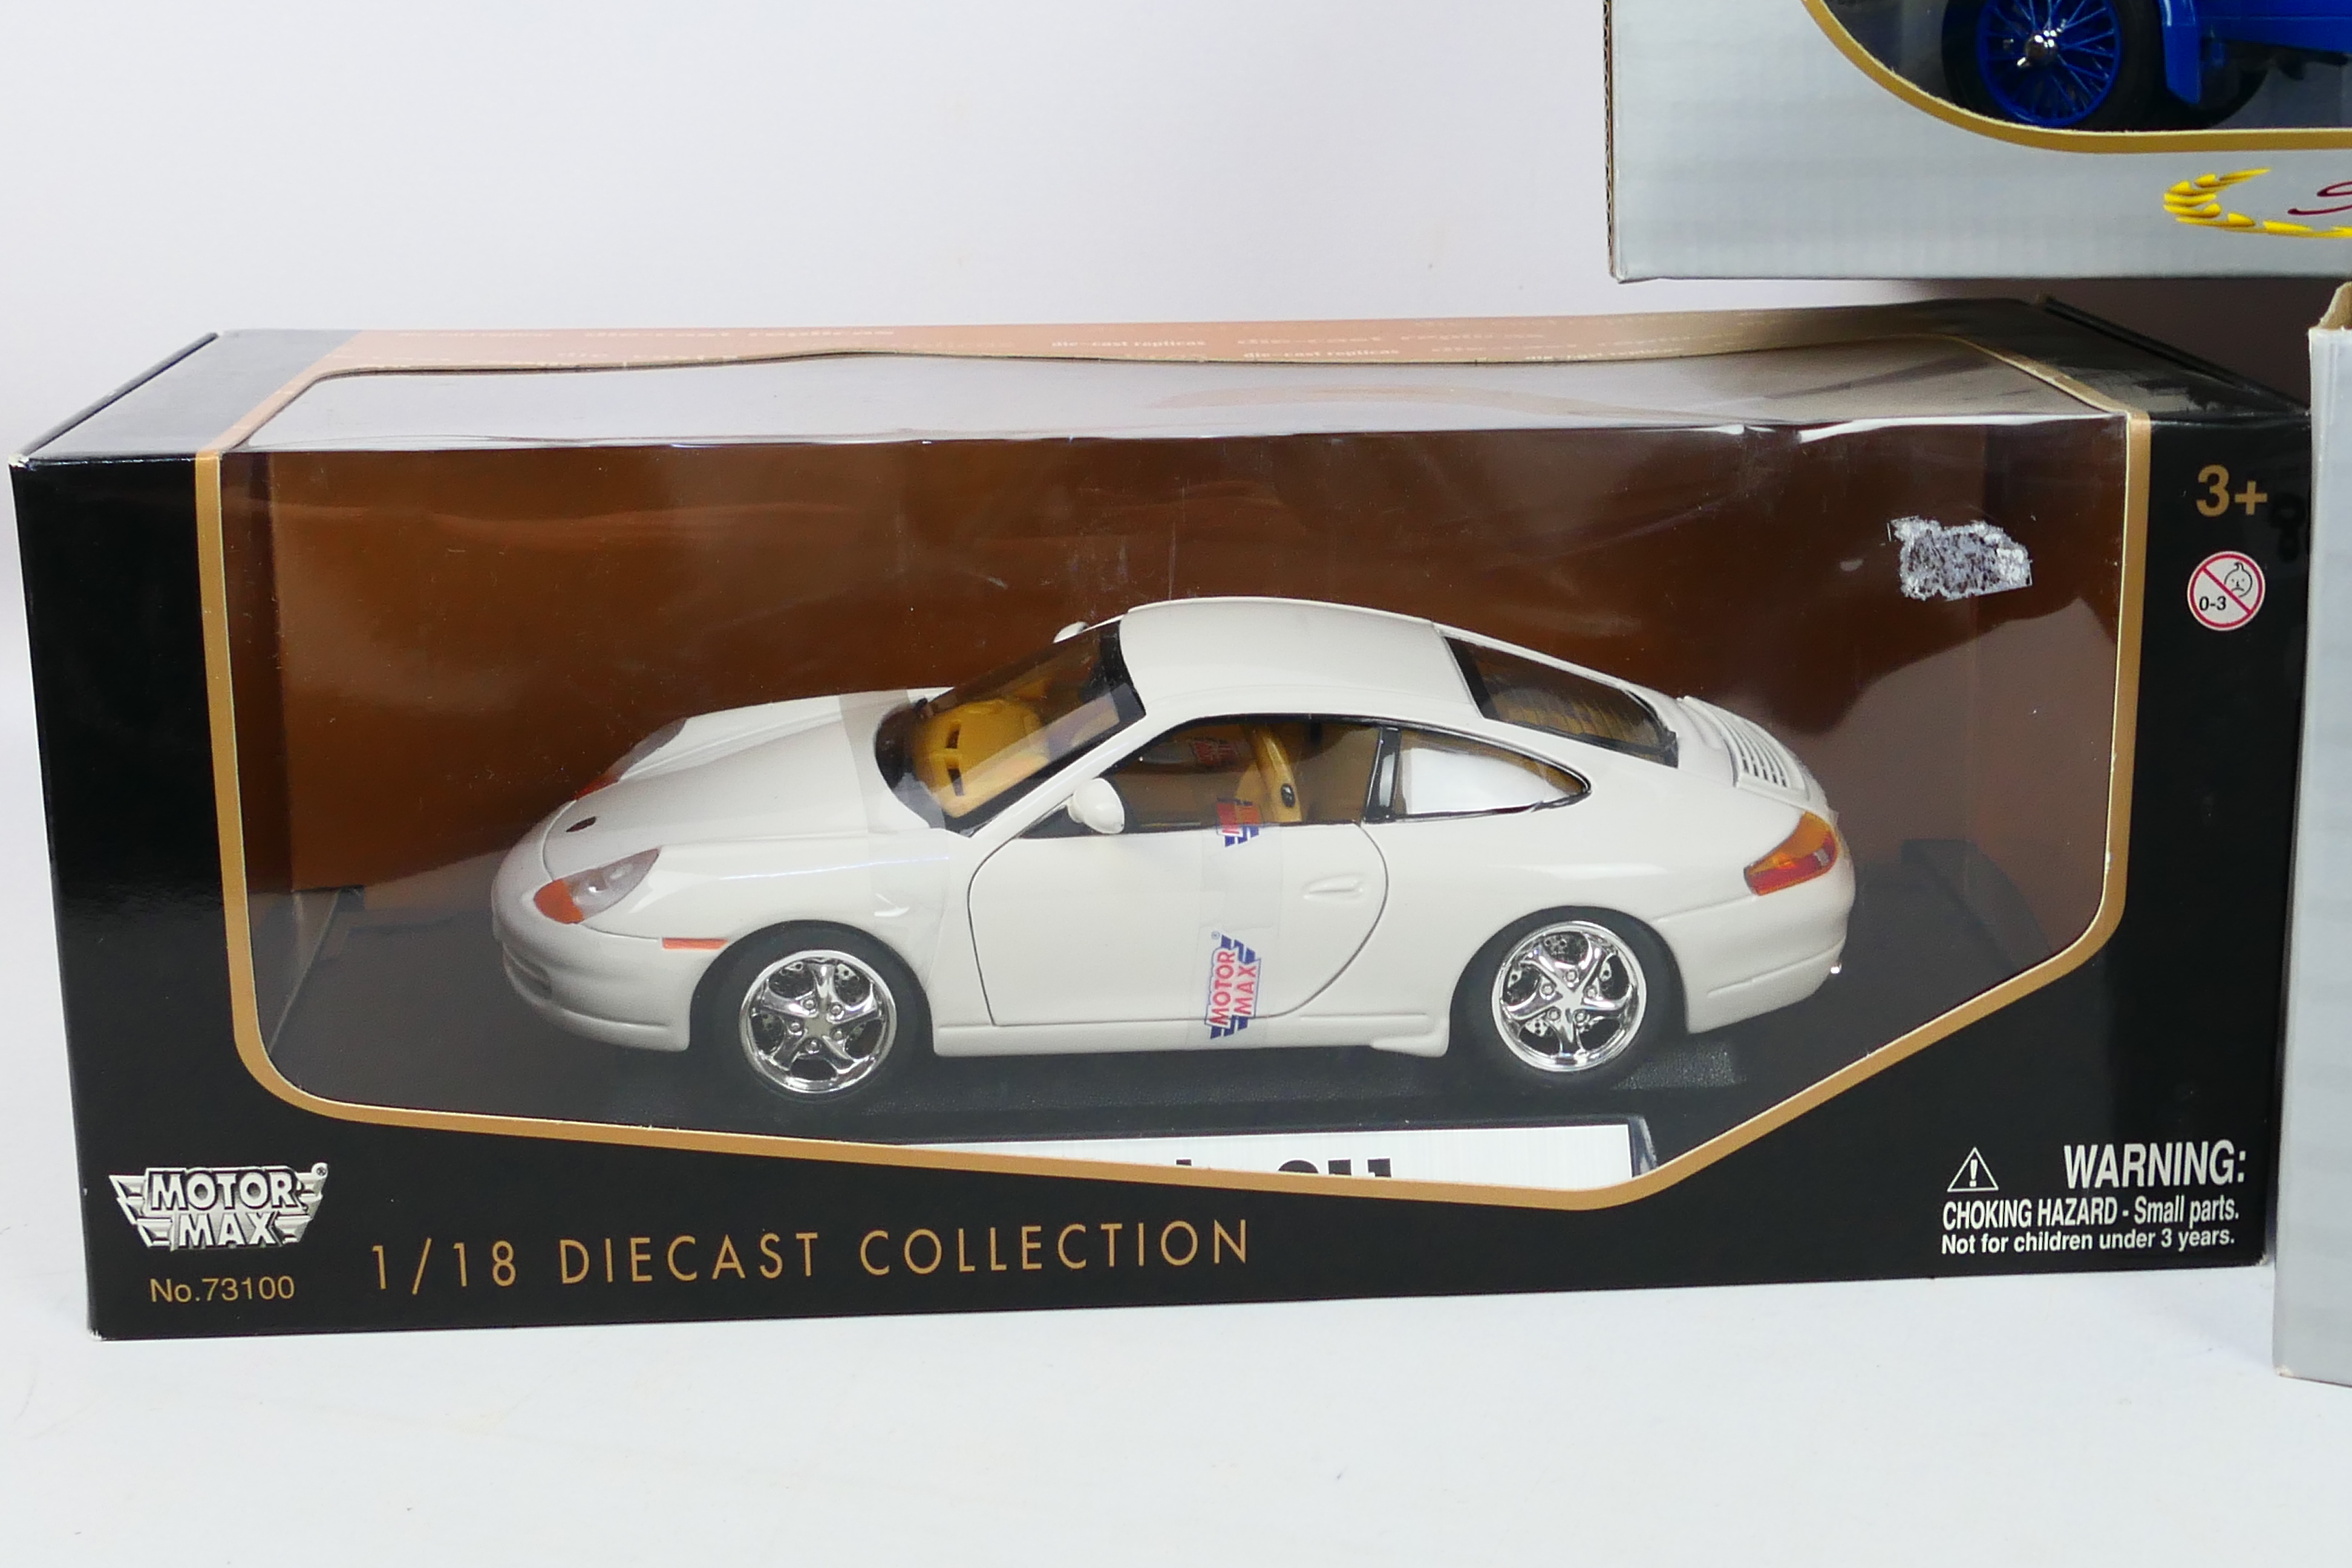 Signature Models - Motor Max - Three boxed 1:18 scale diecast model vehicles. - Image 2 of 4